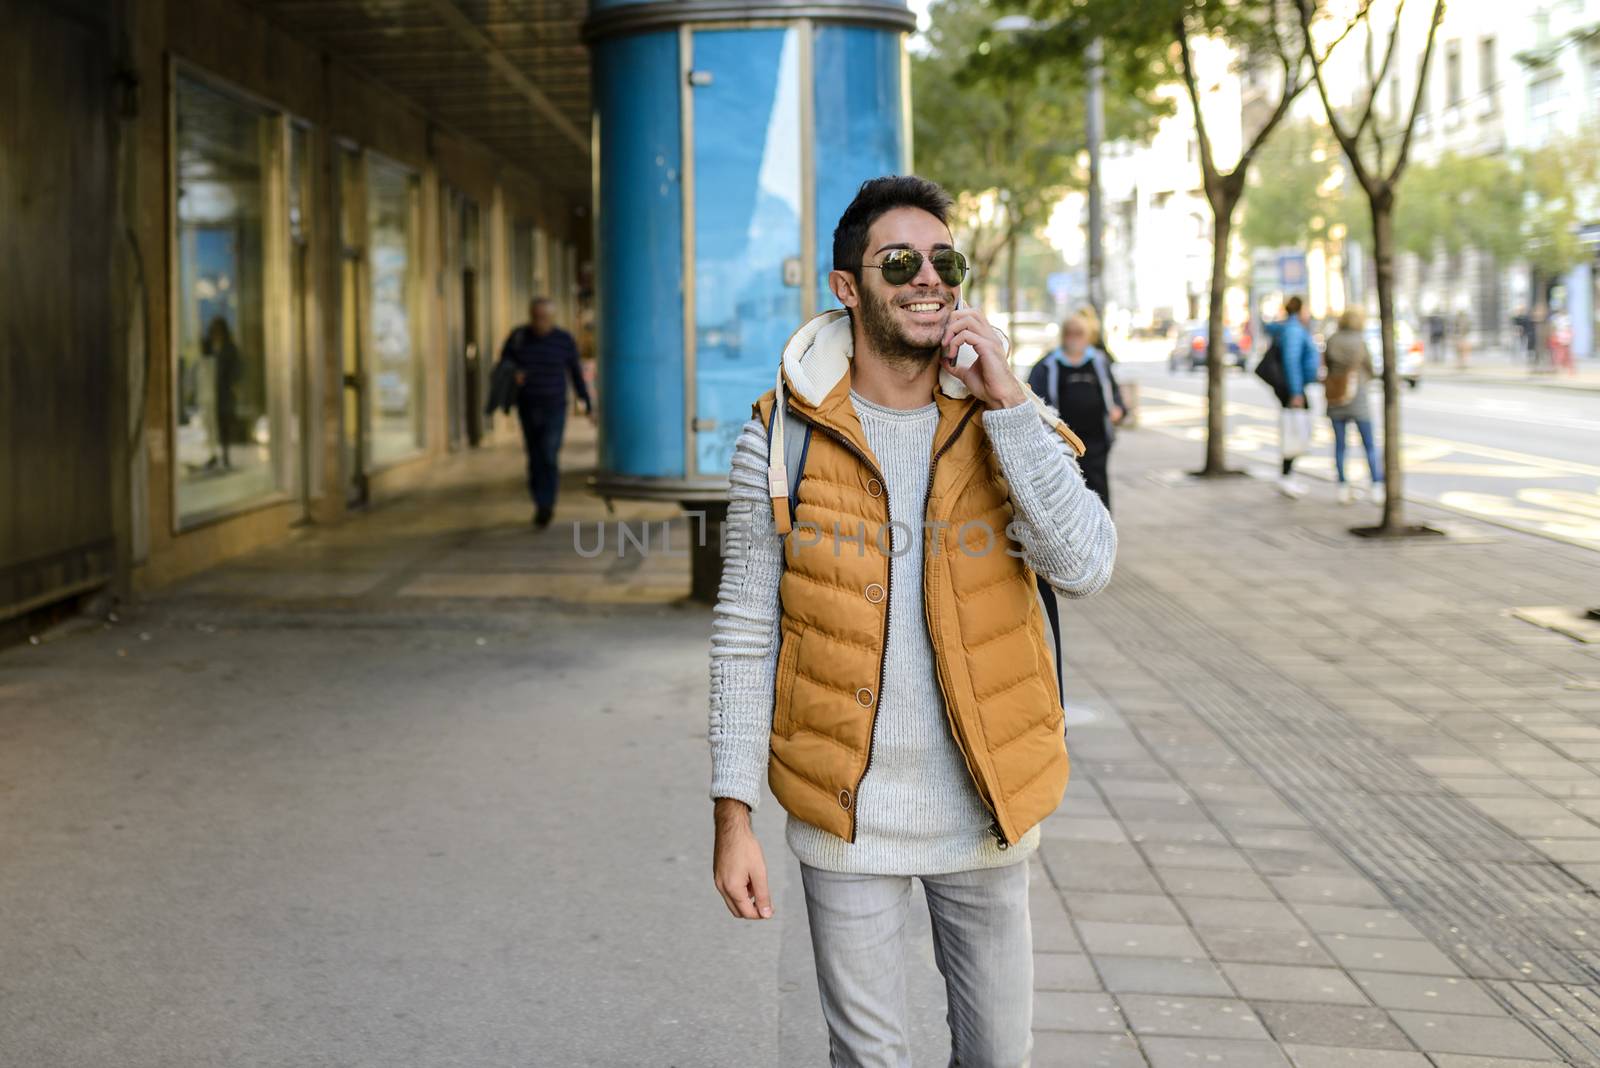 Young hipster with orange jacket and sunglasses with his smart phone in the city street